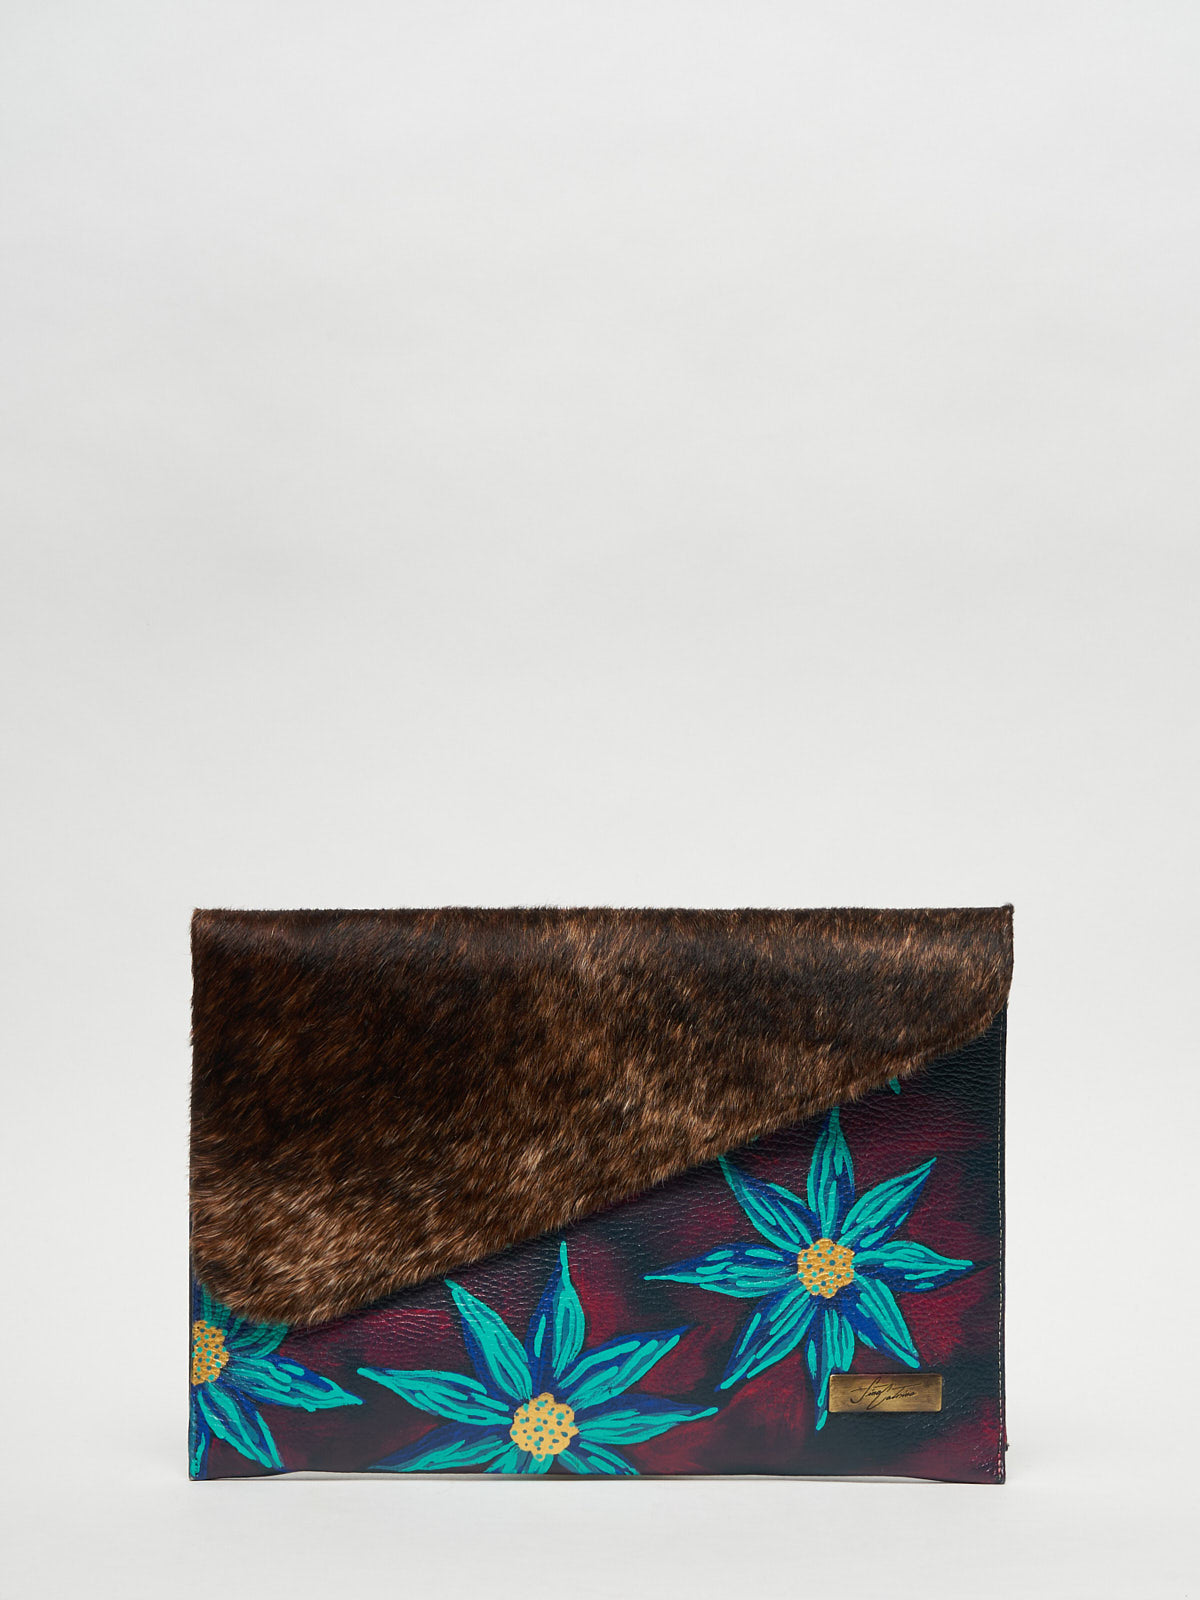 HAND PAINTED LEATHER CLUTCH - FINA CATRINA